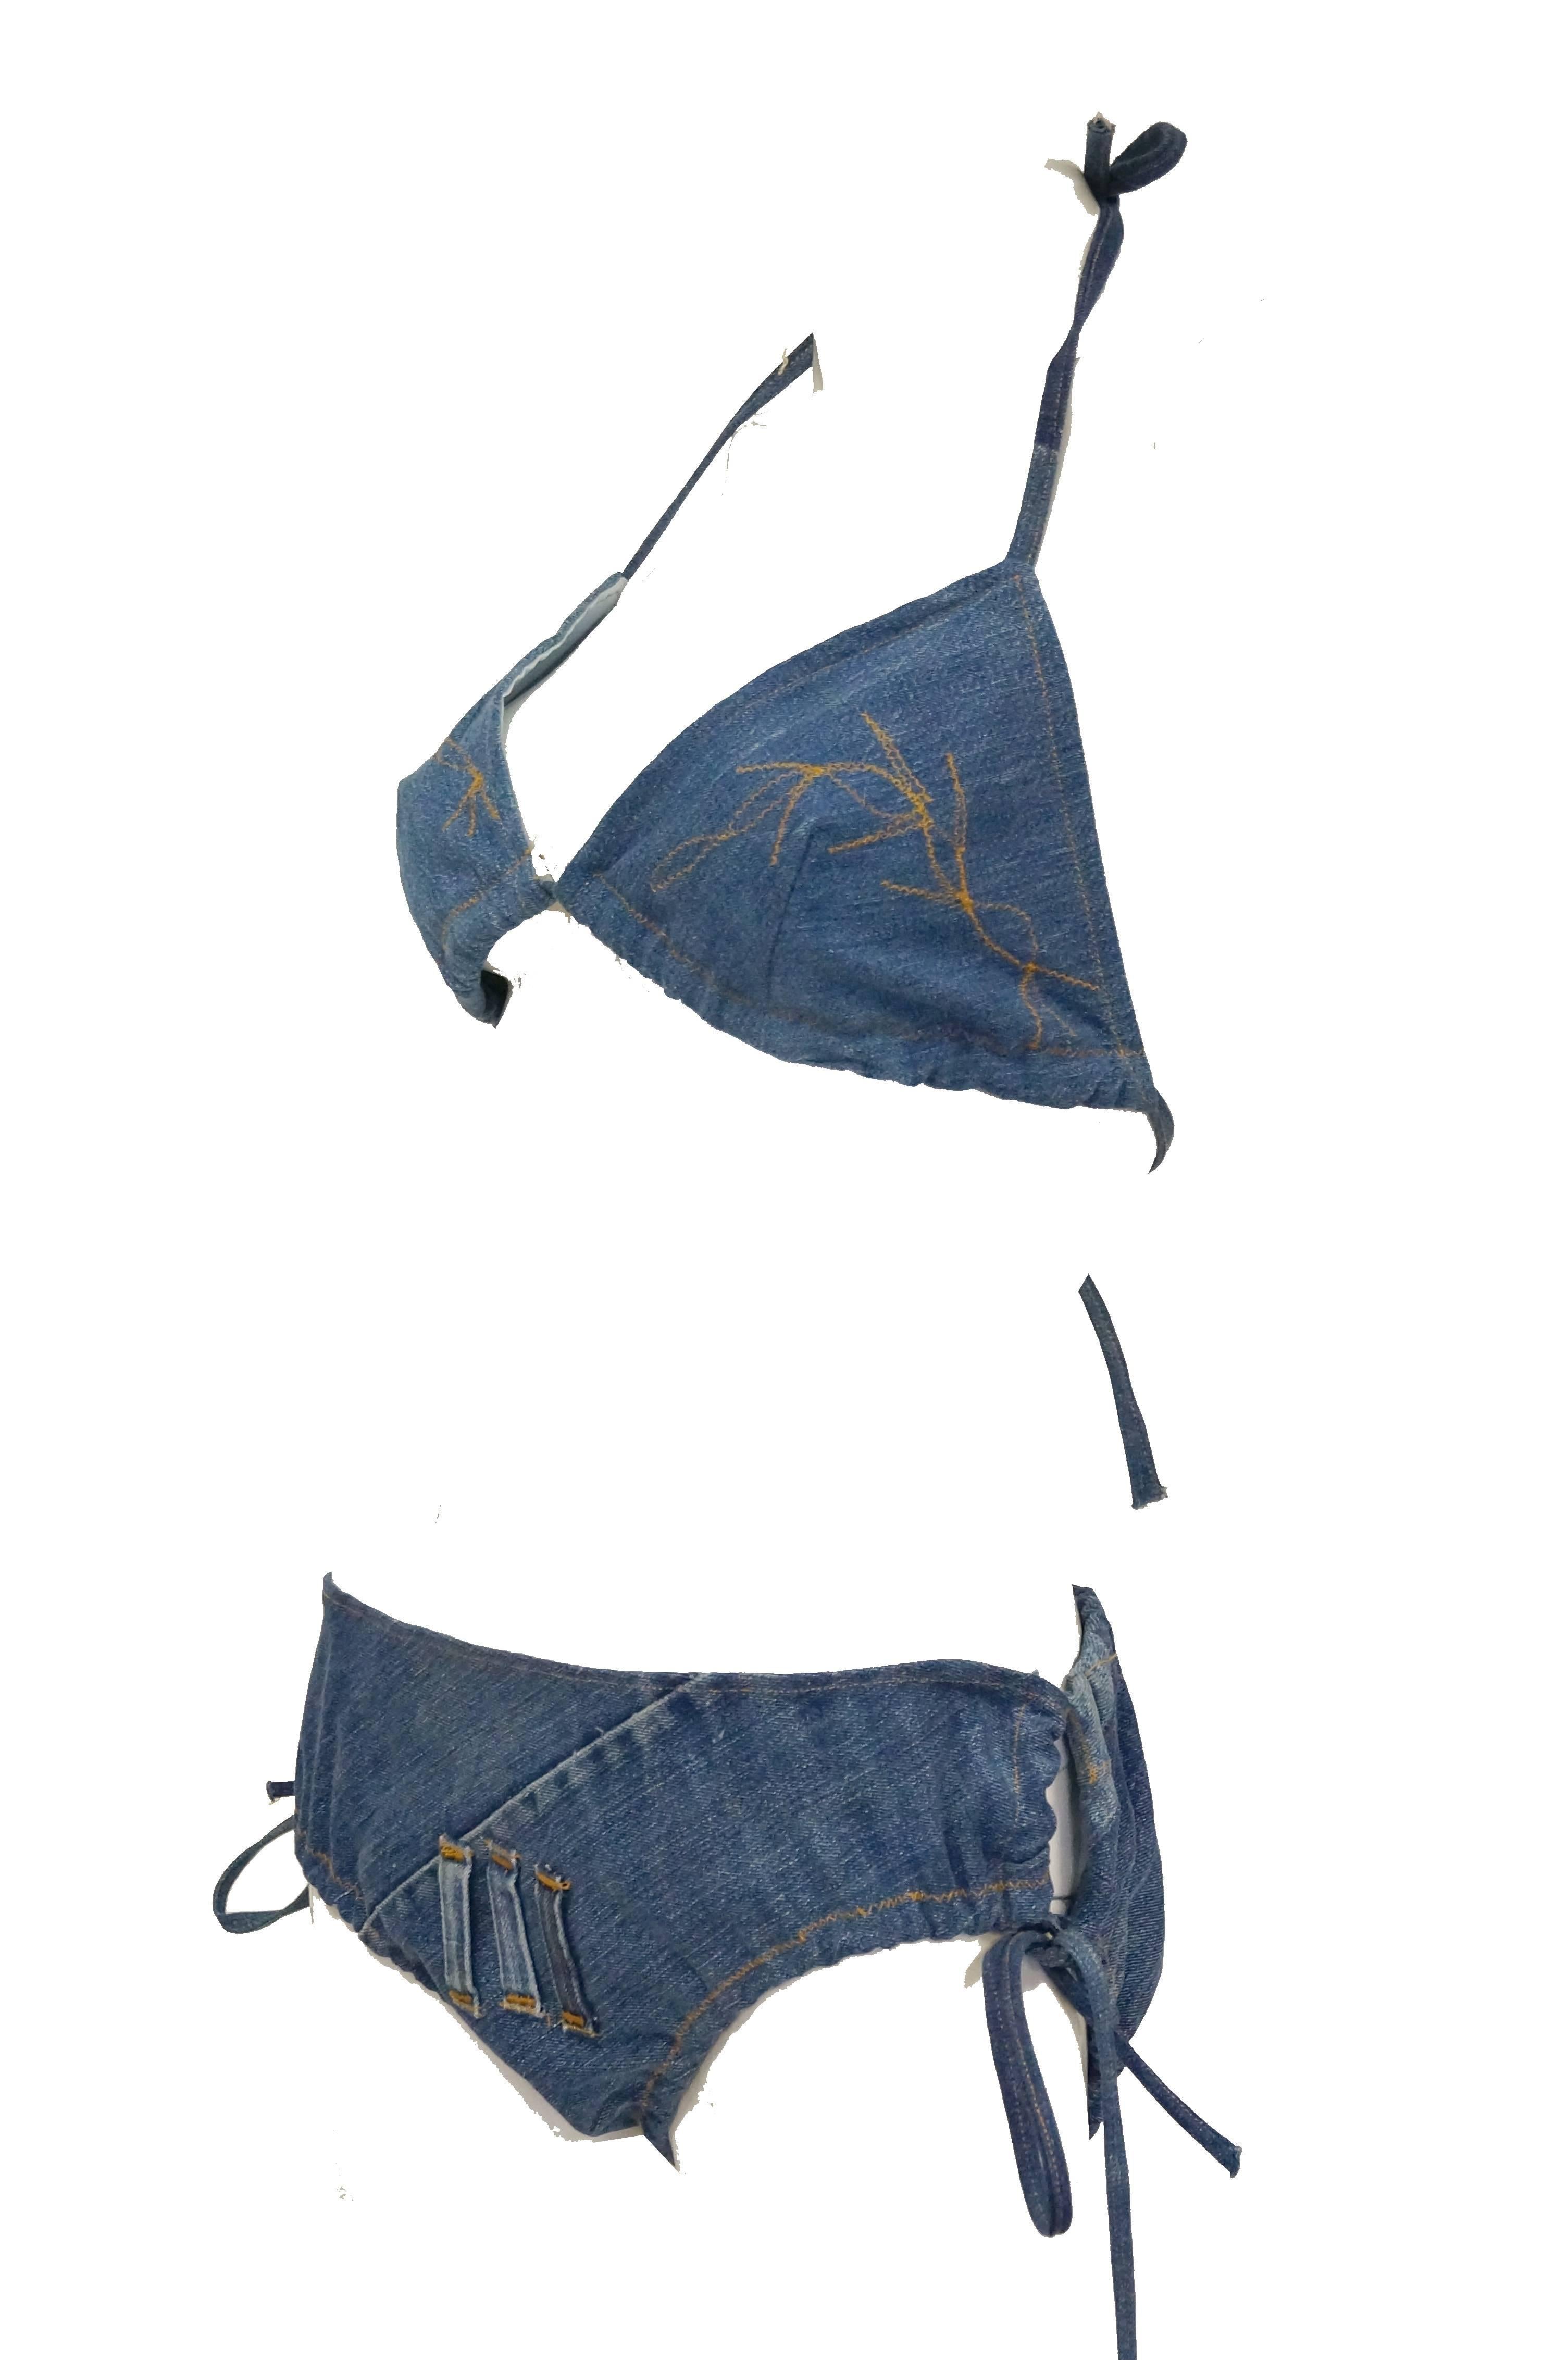 1970s medium wash denim string bikini with gold top stitch. Bikini has triangle top with straps and geometric stitch detail. Bikini bottoms have loop tie detail on sides, three belt loops in front (for a leather belt with brass rings - not included